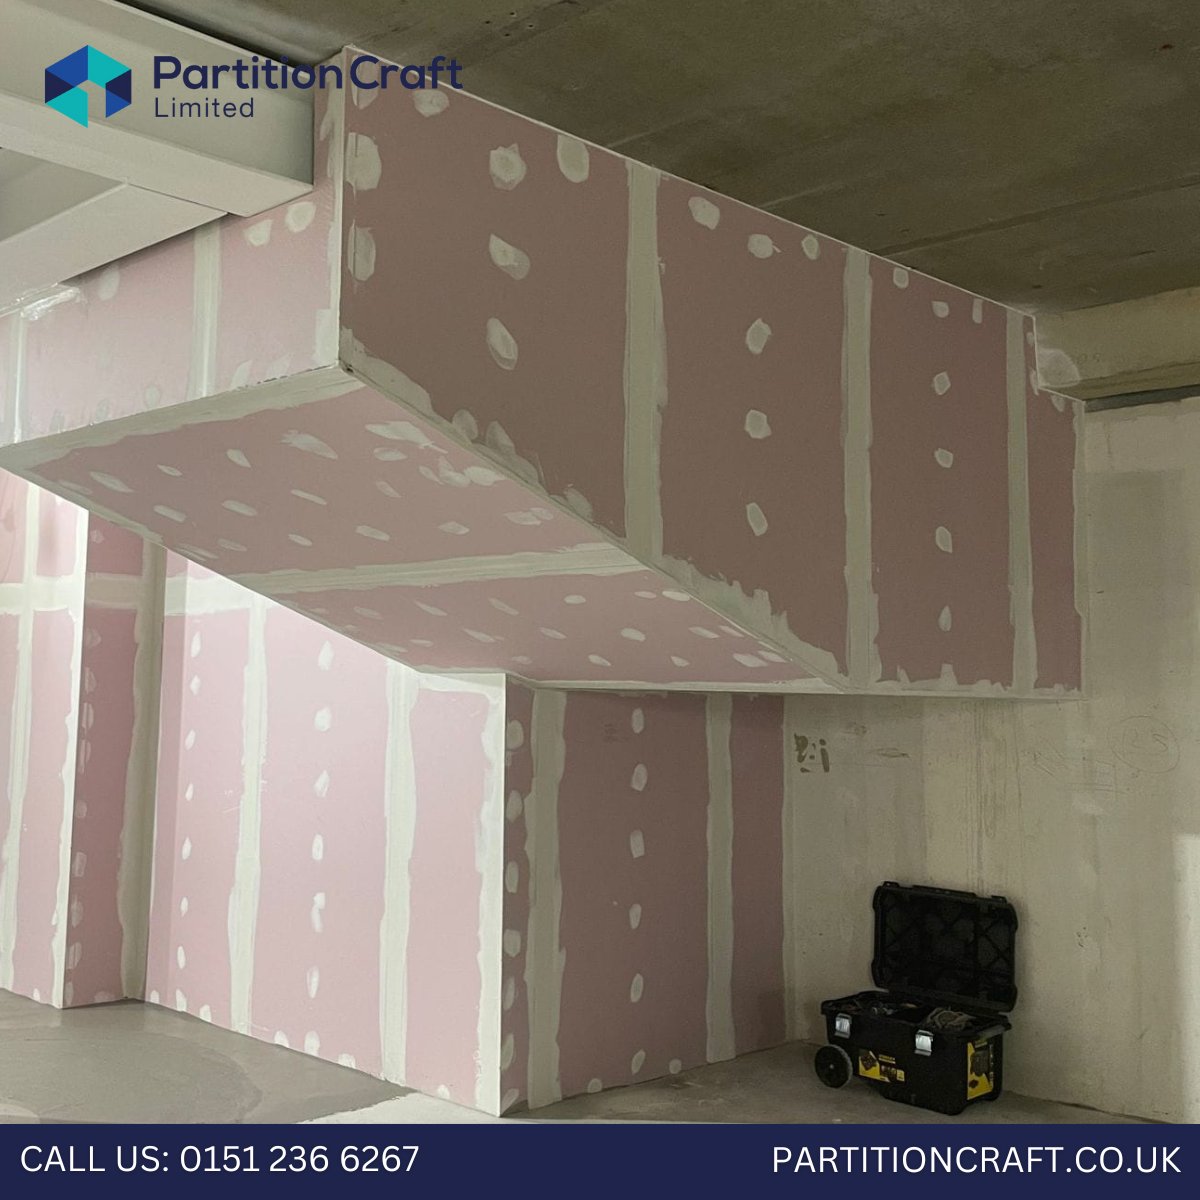 We provide the supply and installation of a full range of fire protection services that are vital to protecting both the users and tenants of the building and damage to contents and building structure.

Find out more: partitioncraft.co.uk/passive-fire-p…

#partitions #passivefireprotection